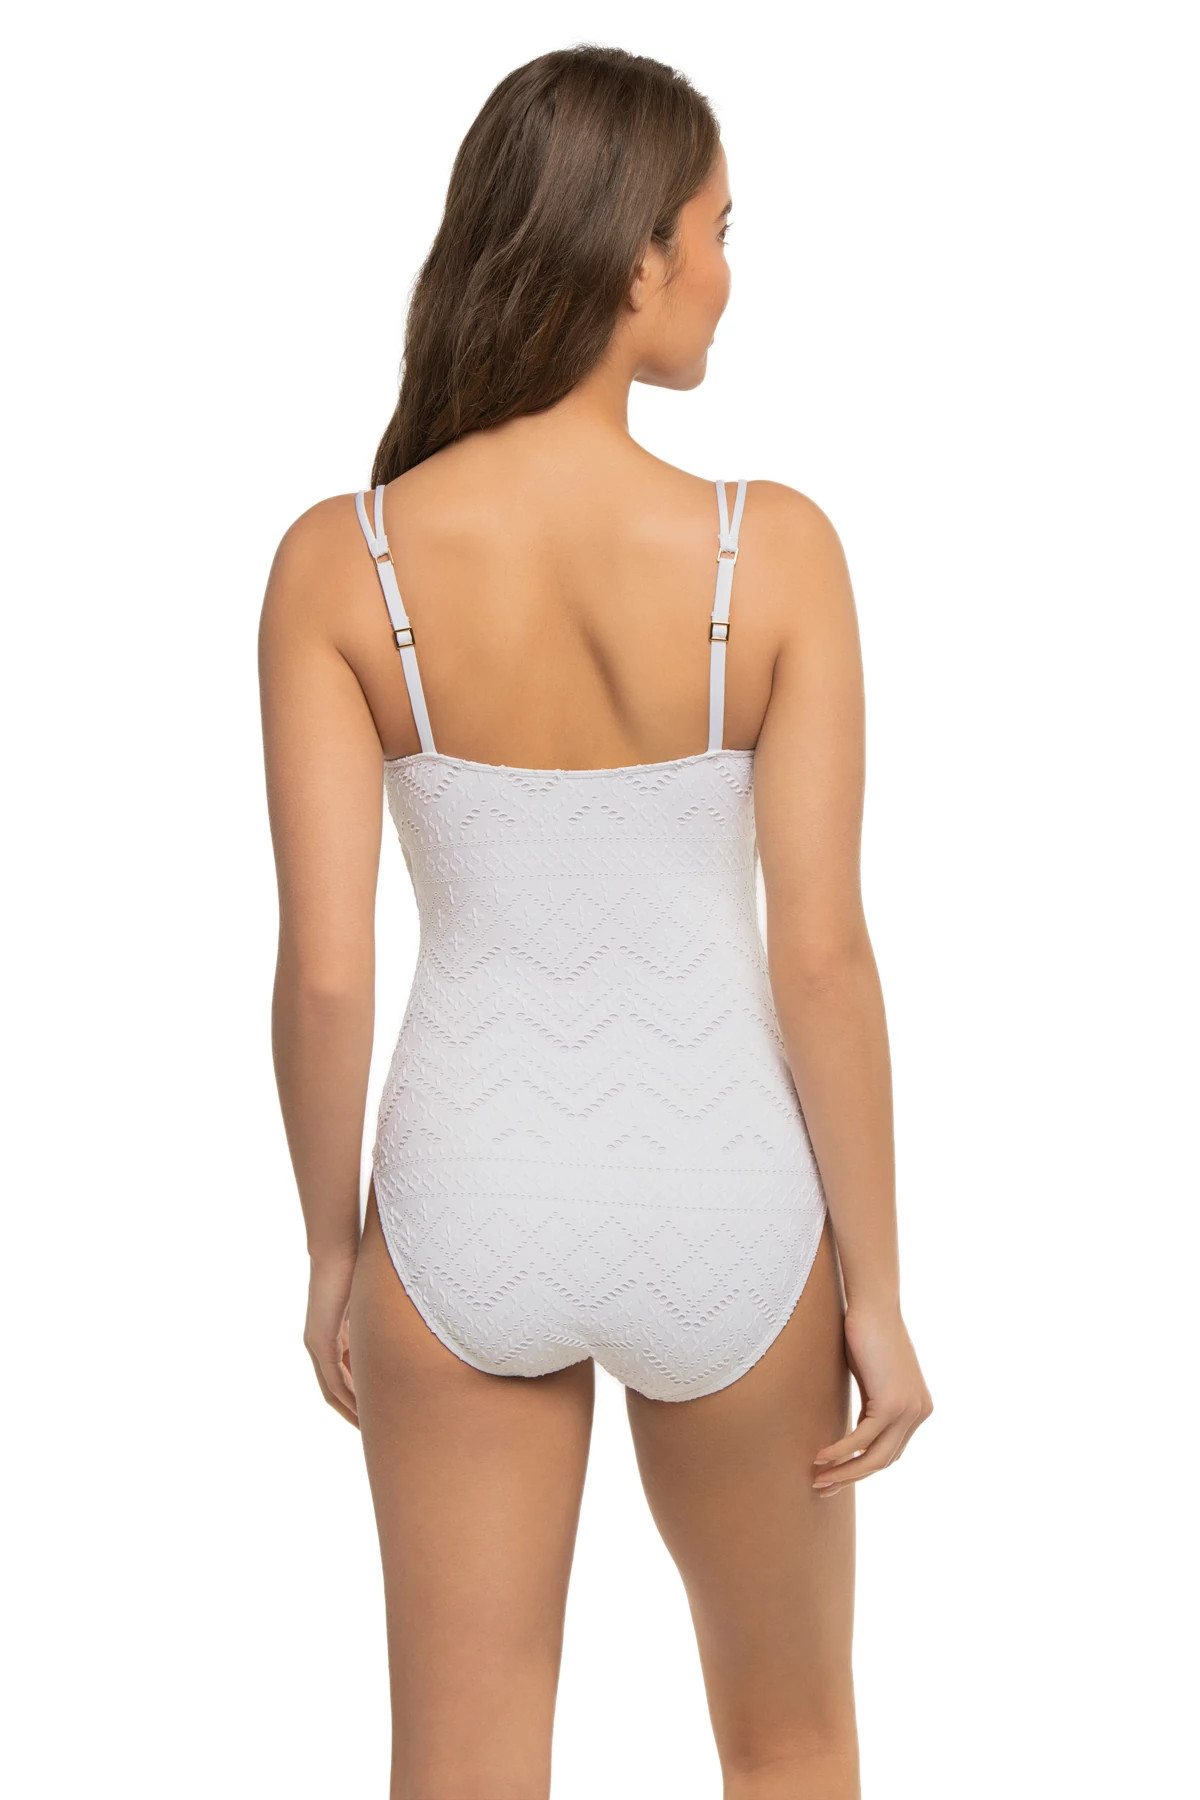 Saltwater Sands Lingerie One Piece Swimsuit image number 2